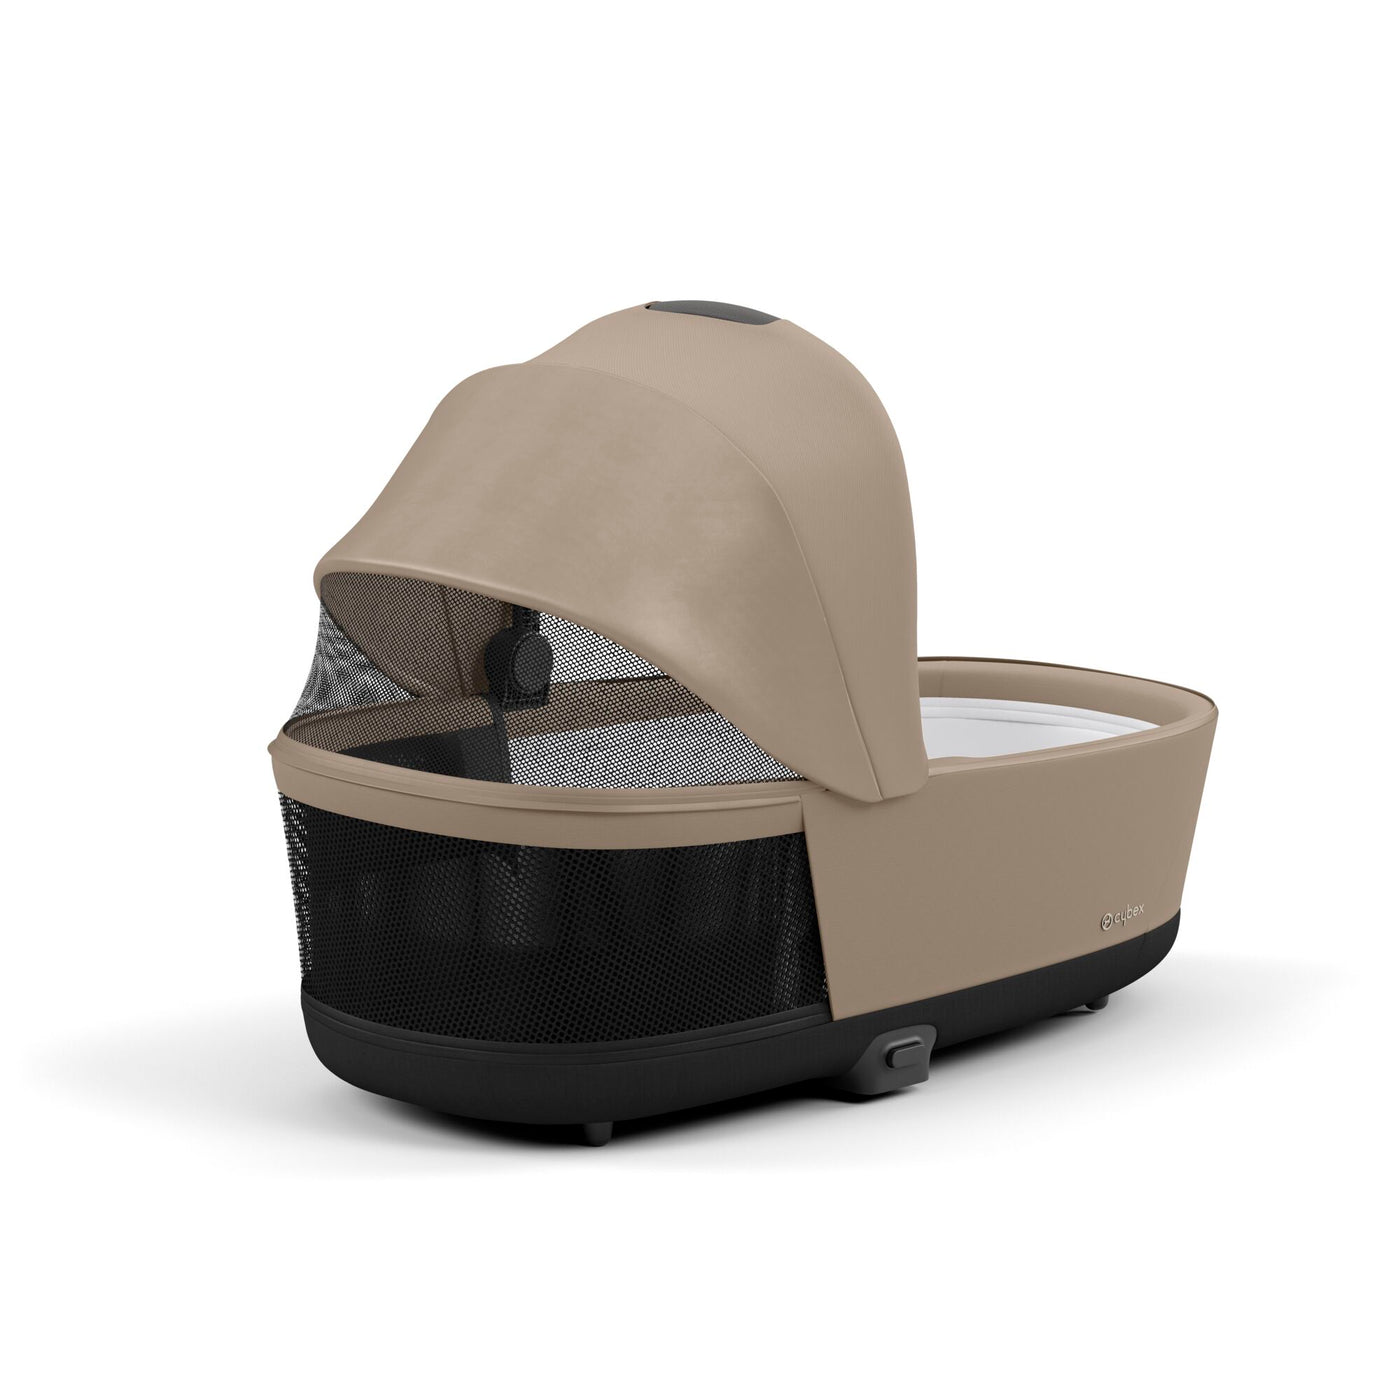 Cybex mios cozy beige lux carrycot with open mesh backing for summer months 